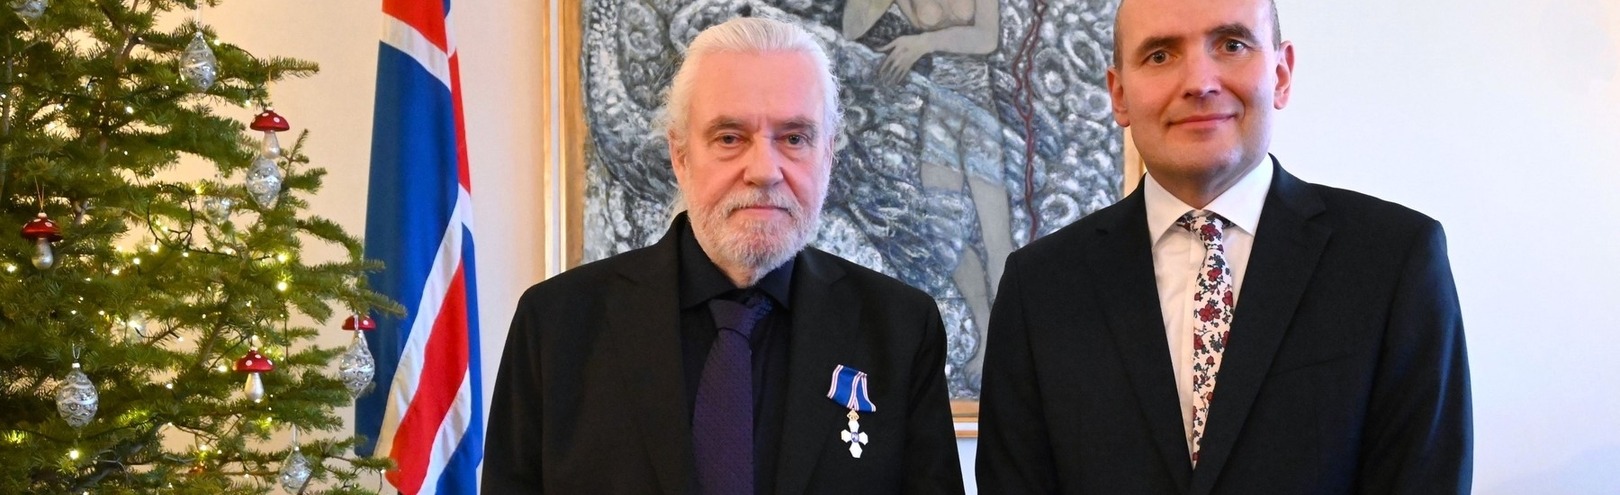 Vilmundur Guðnason awarded the Icelandic Falcon Order on New Year&#039;s Day - Available at University of Iceland